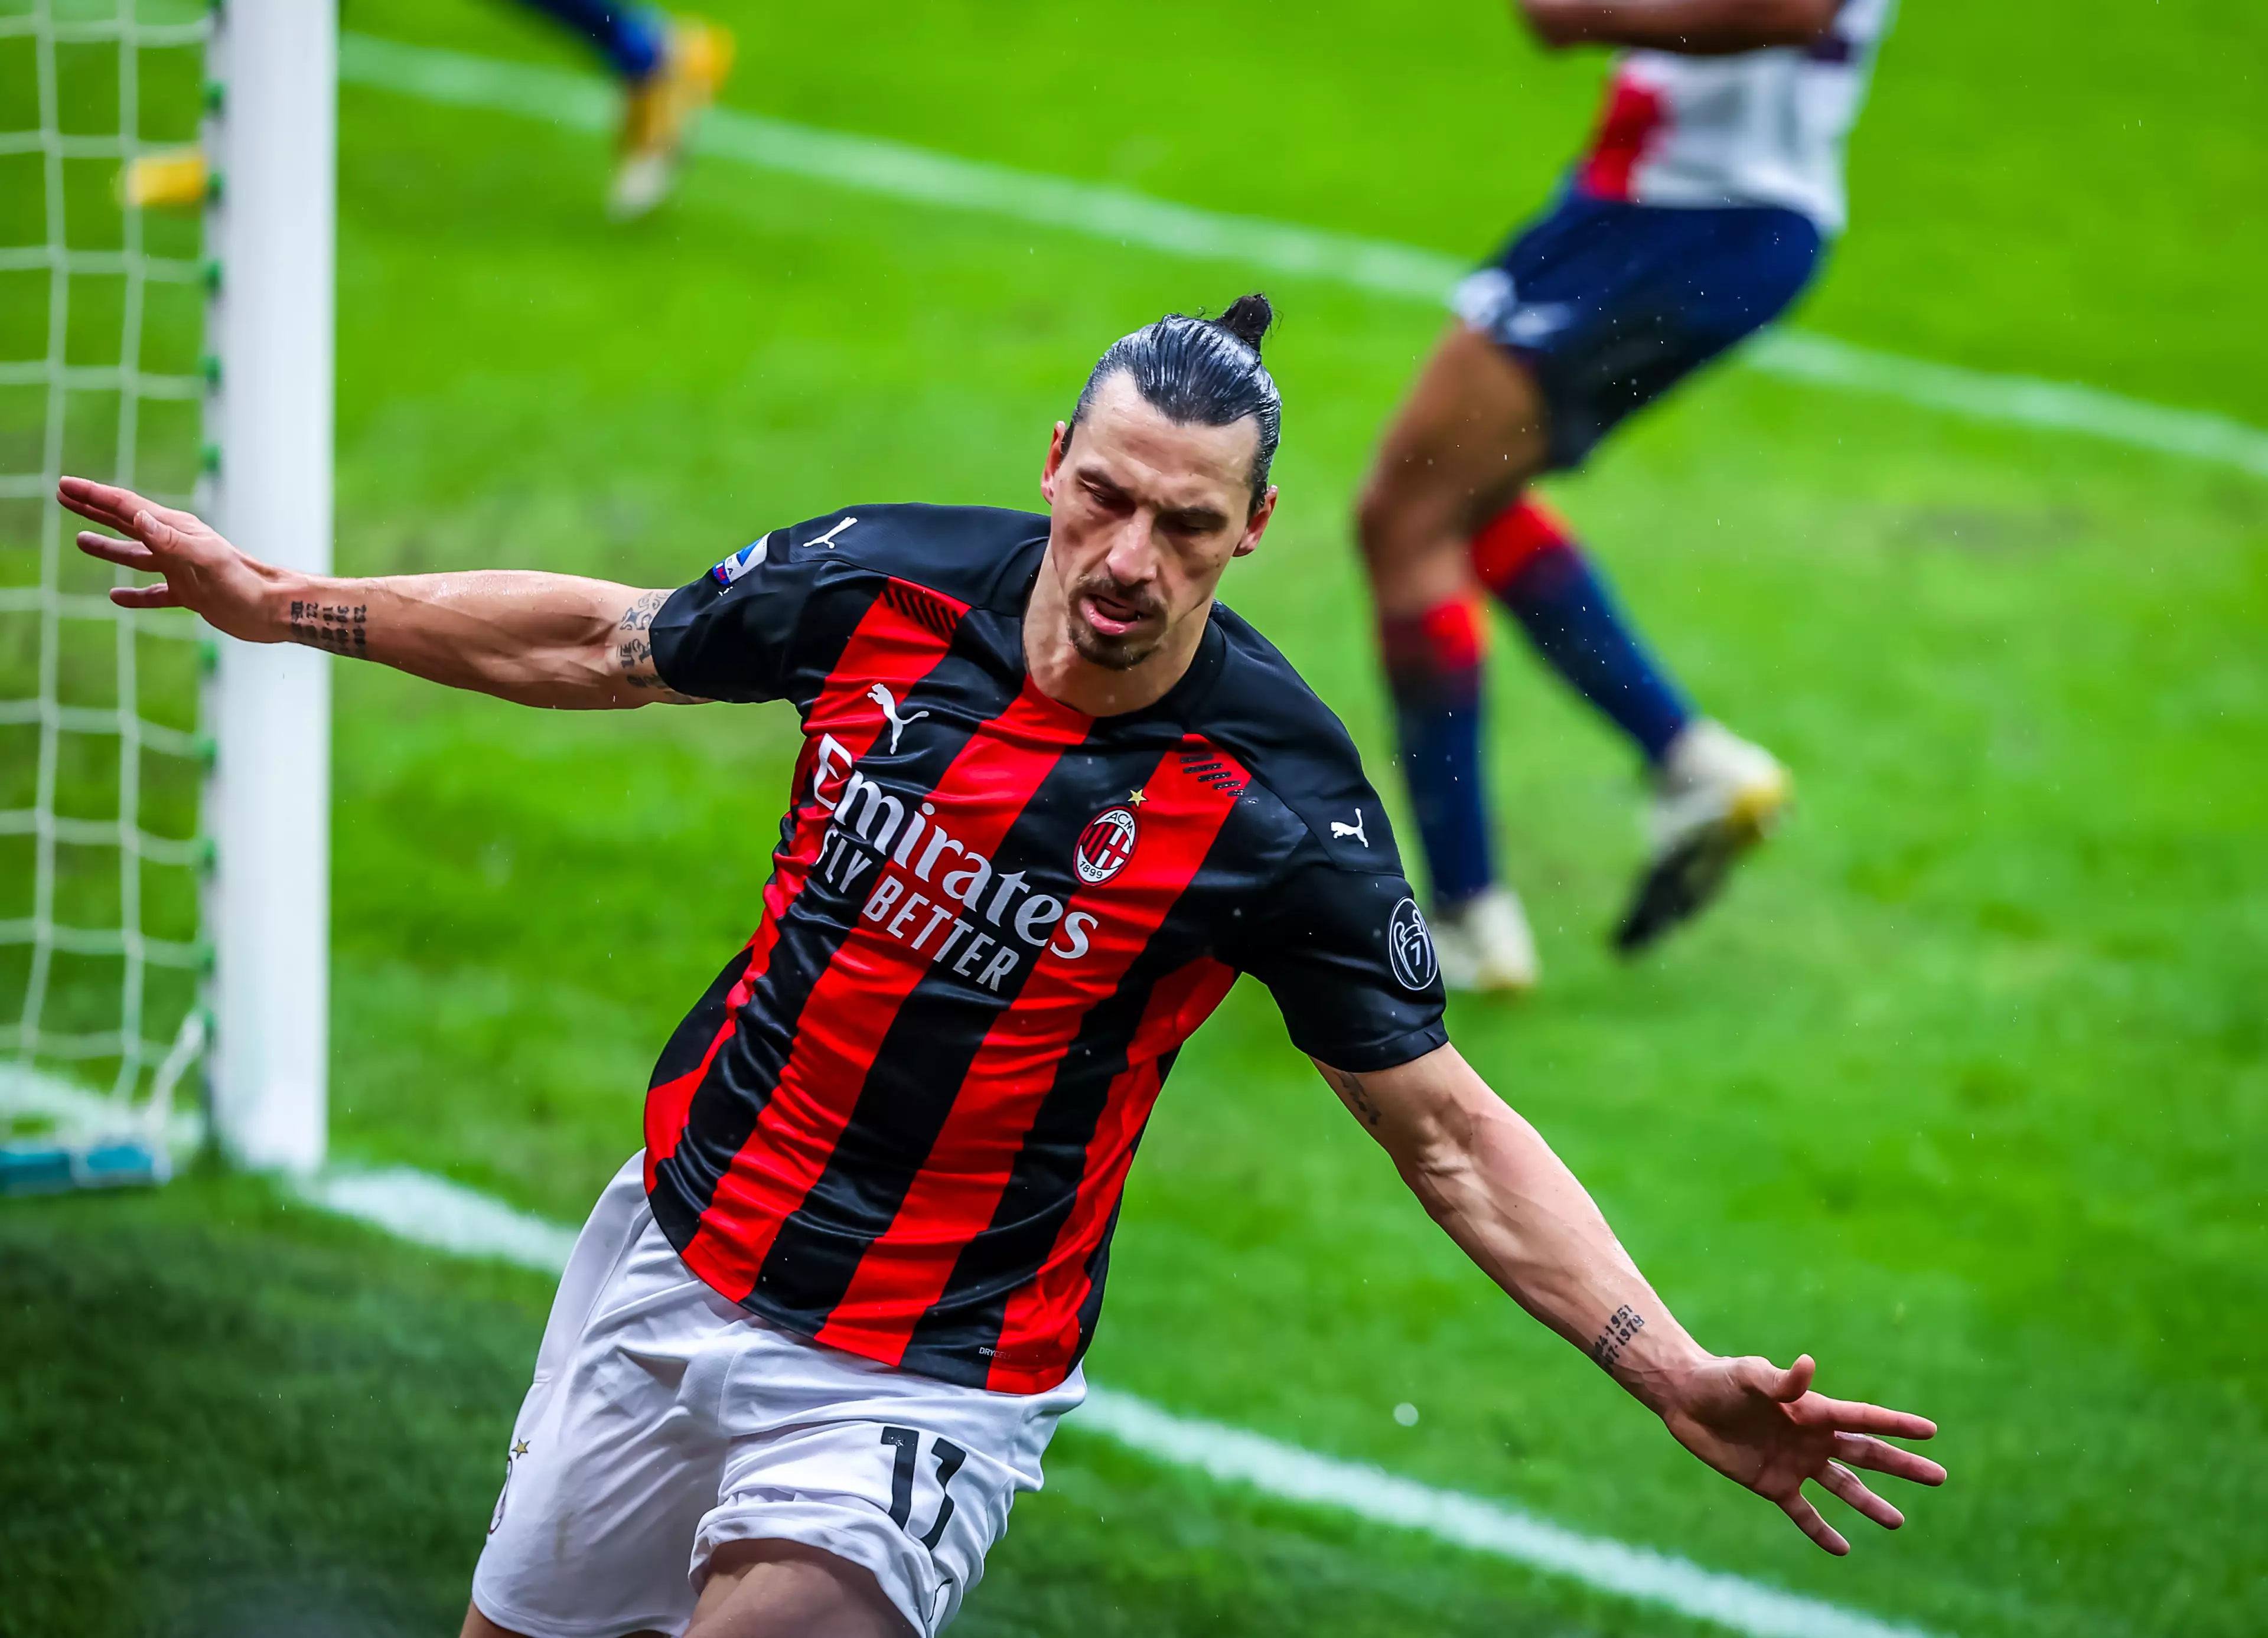 Ibra has been in excellent form this season. Image: PA Images